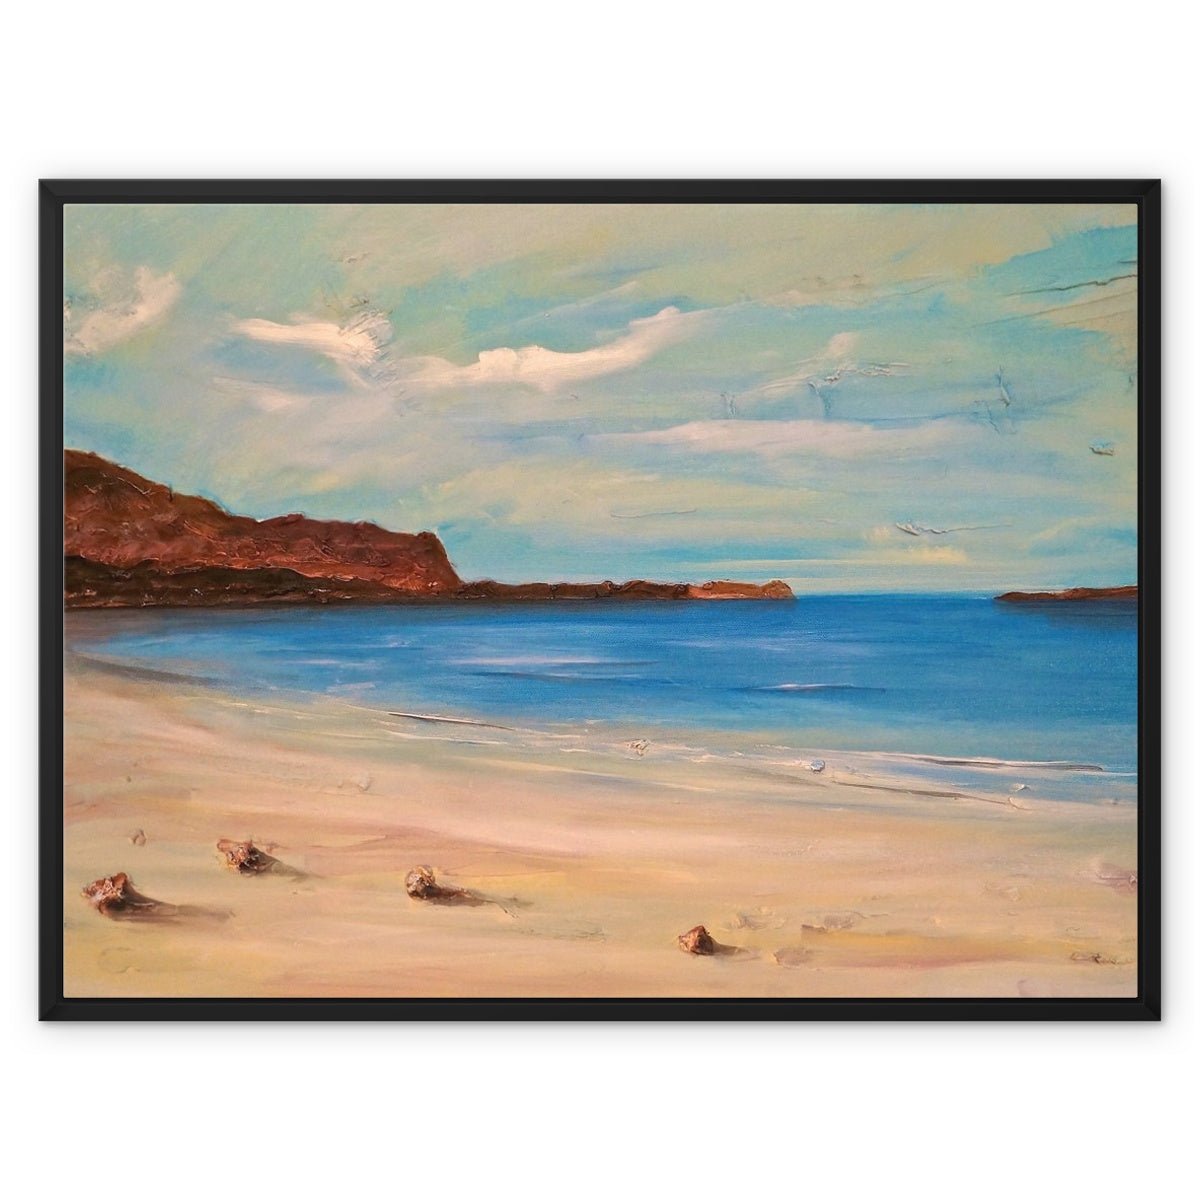 Bosta Beach Lewis Painting | Framed Canvas From Scotland-Floating Framed Canvas Prints-Hebridean Islands Art Gallery-32"x24"-Black Frame-Paintings, Prints, Homeware, Art Gifts From Scotland By Scottish Artist Kevin Hunter